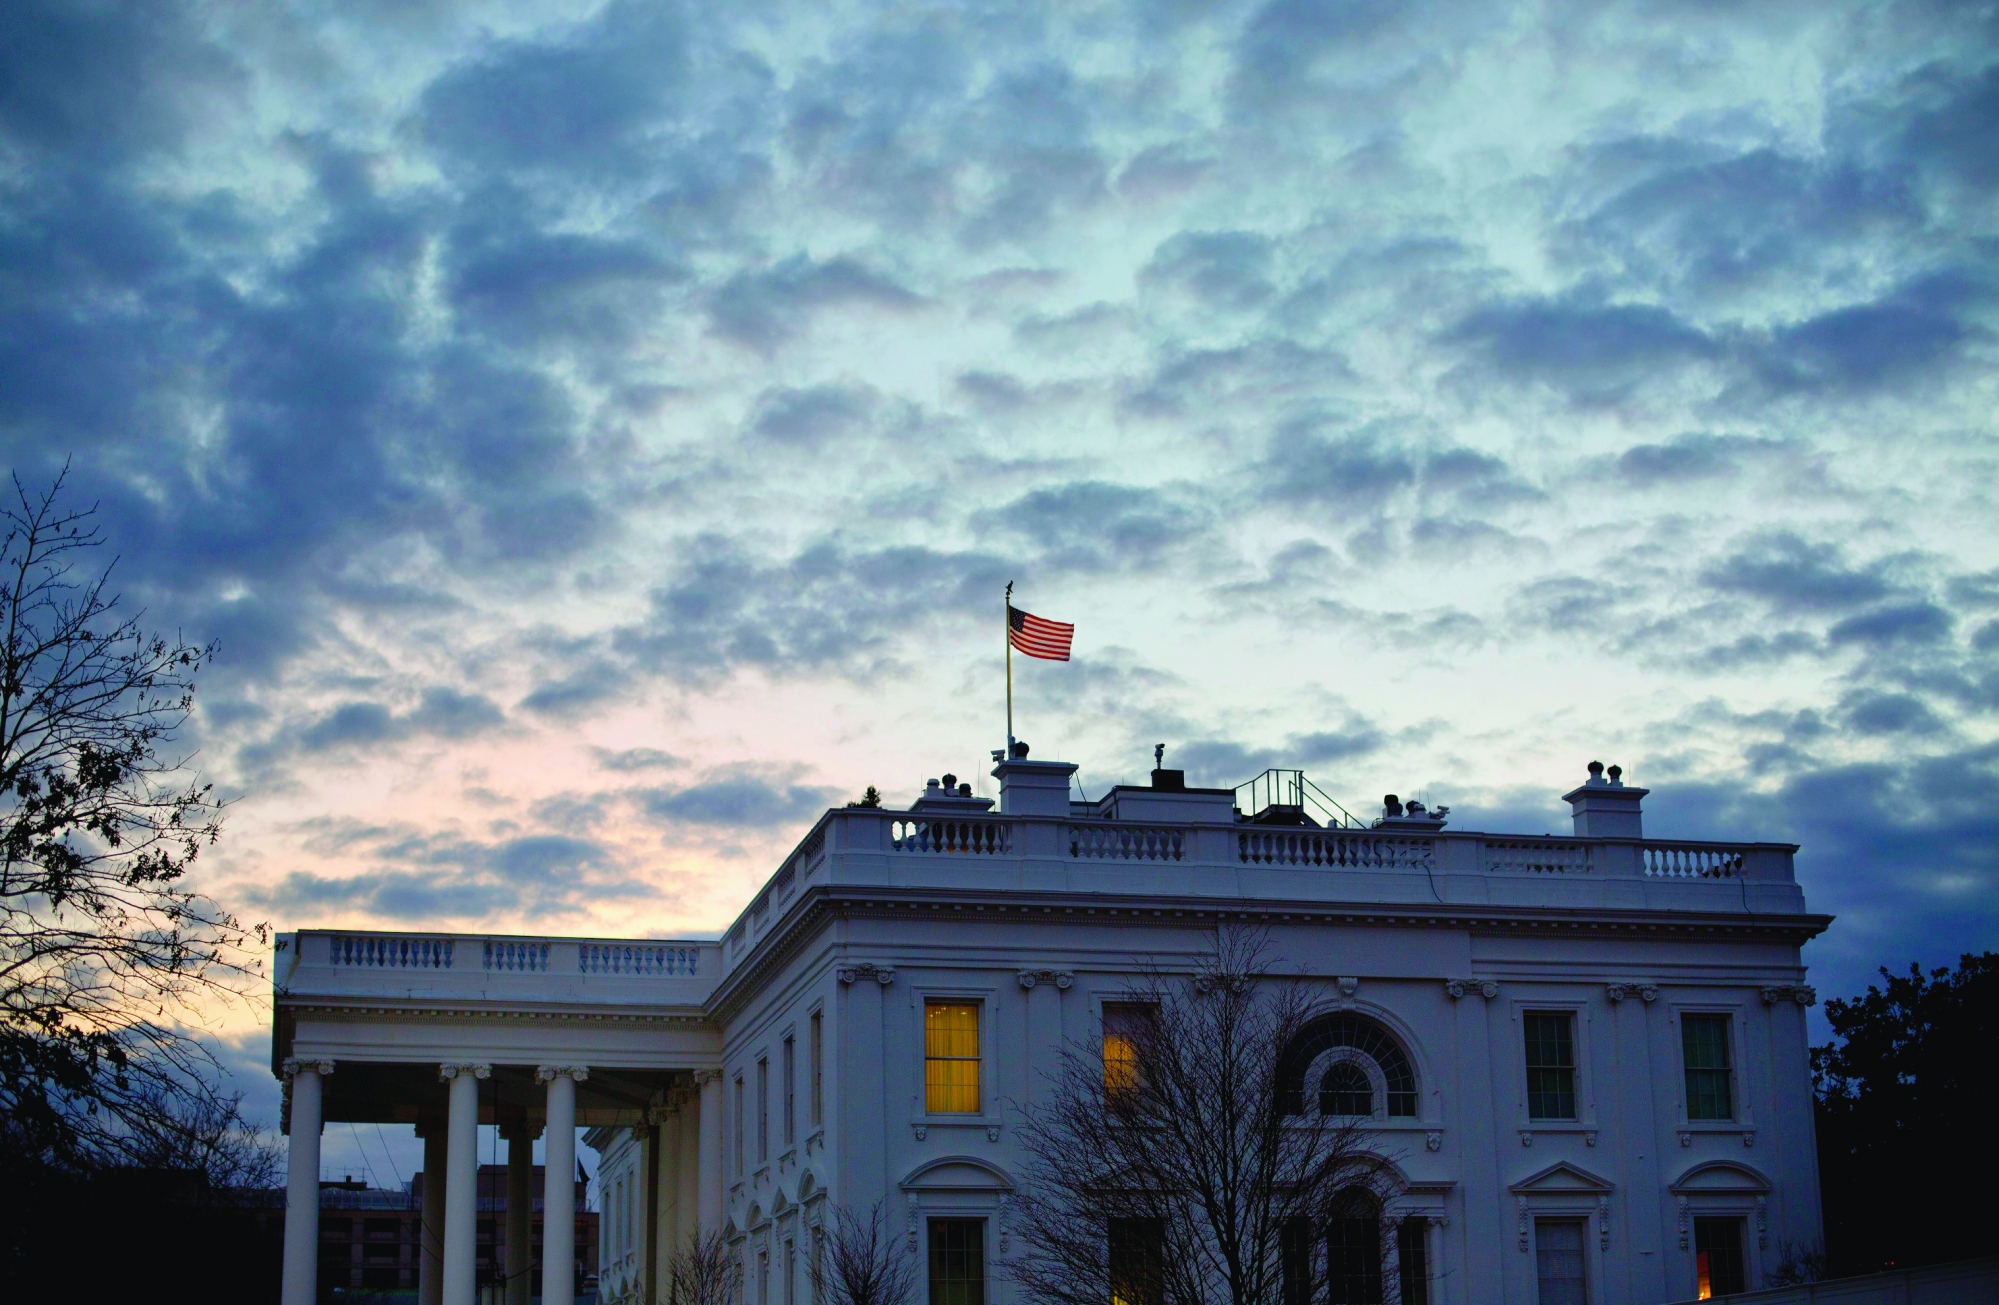 Morning sunrise at the White House in Washington, Friday, Jan. 13, 2017. President Barack Obama is entering the closing stretch of his presidency, an 11th-hour push to tie up loose ends and put finishing touches on his legacy before handing the reins to President-elect Donald Trump. (AP Photo/Pablo Martinez Monsivais) Obama